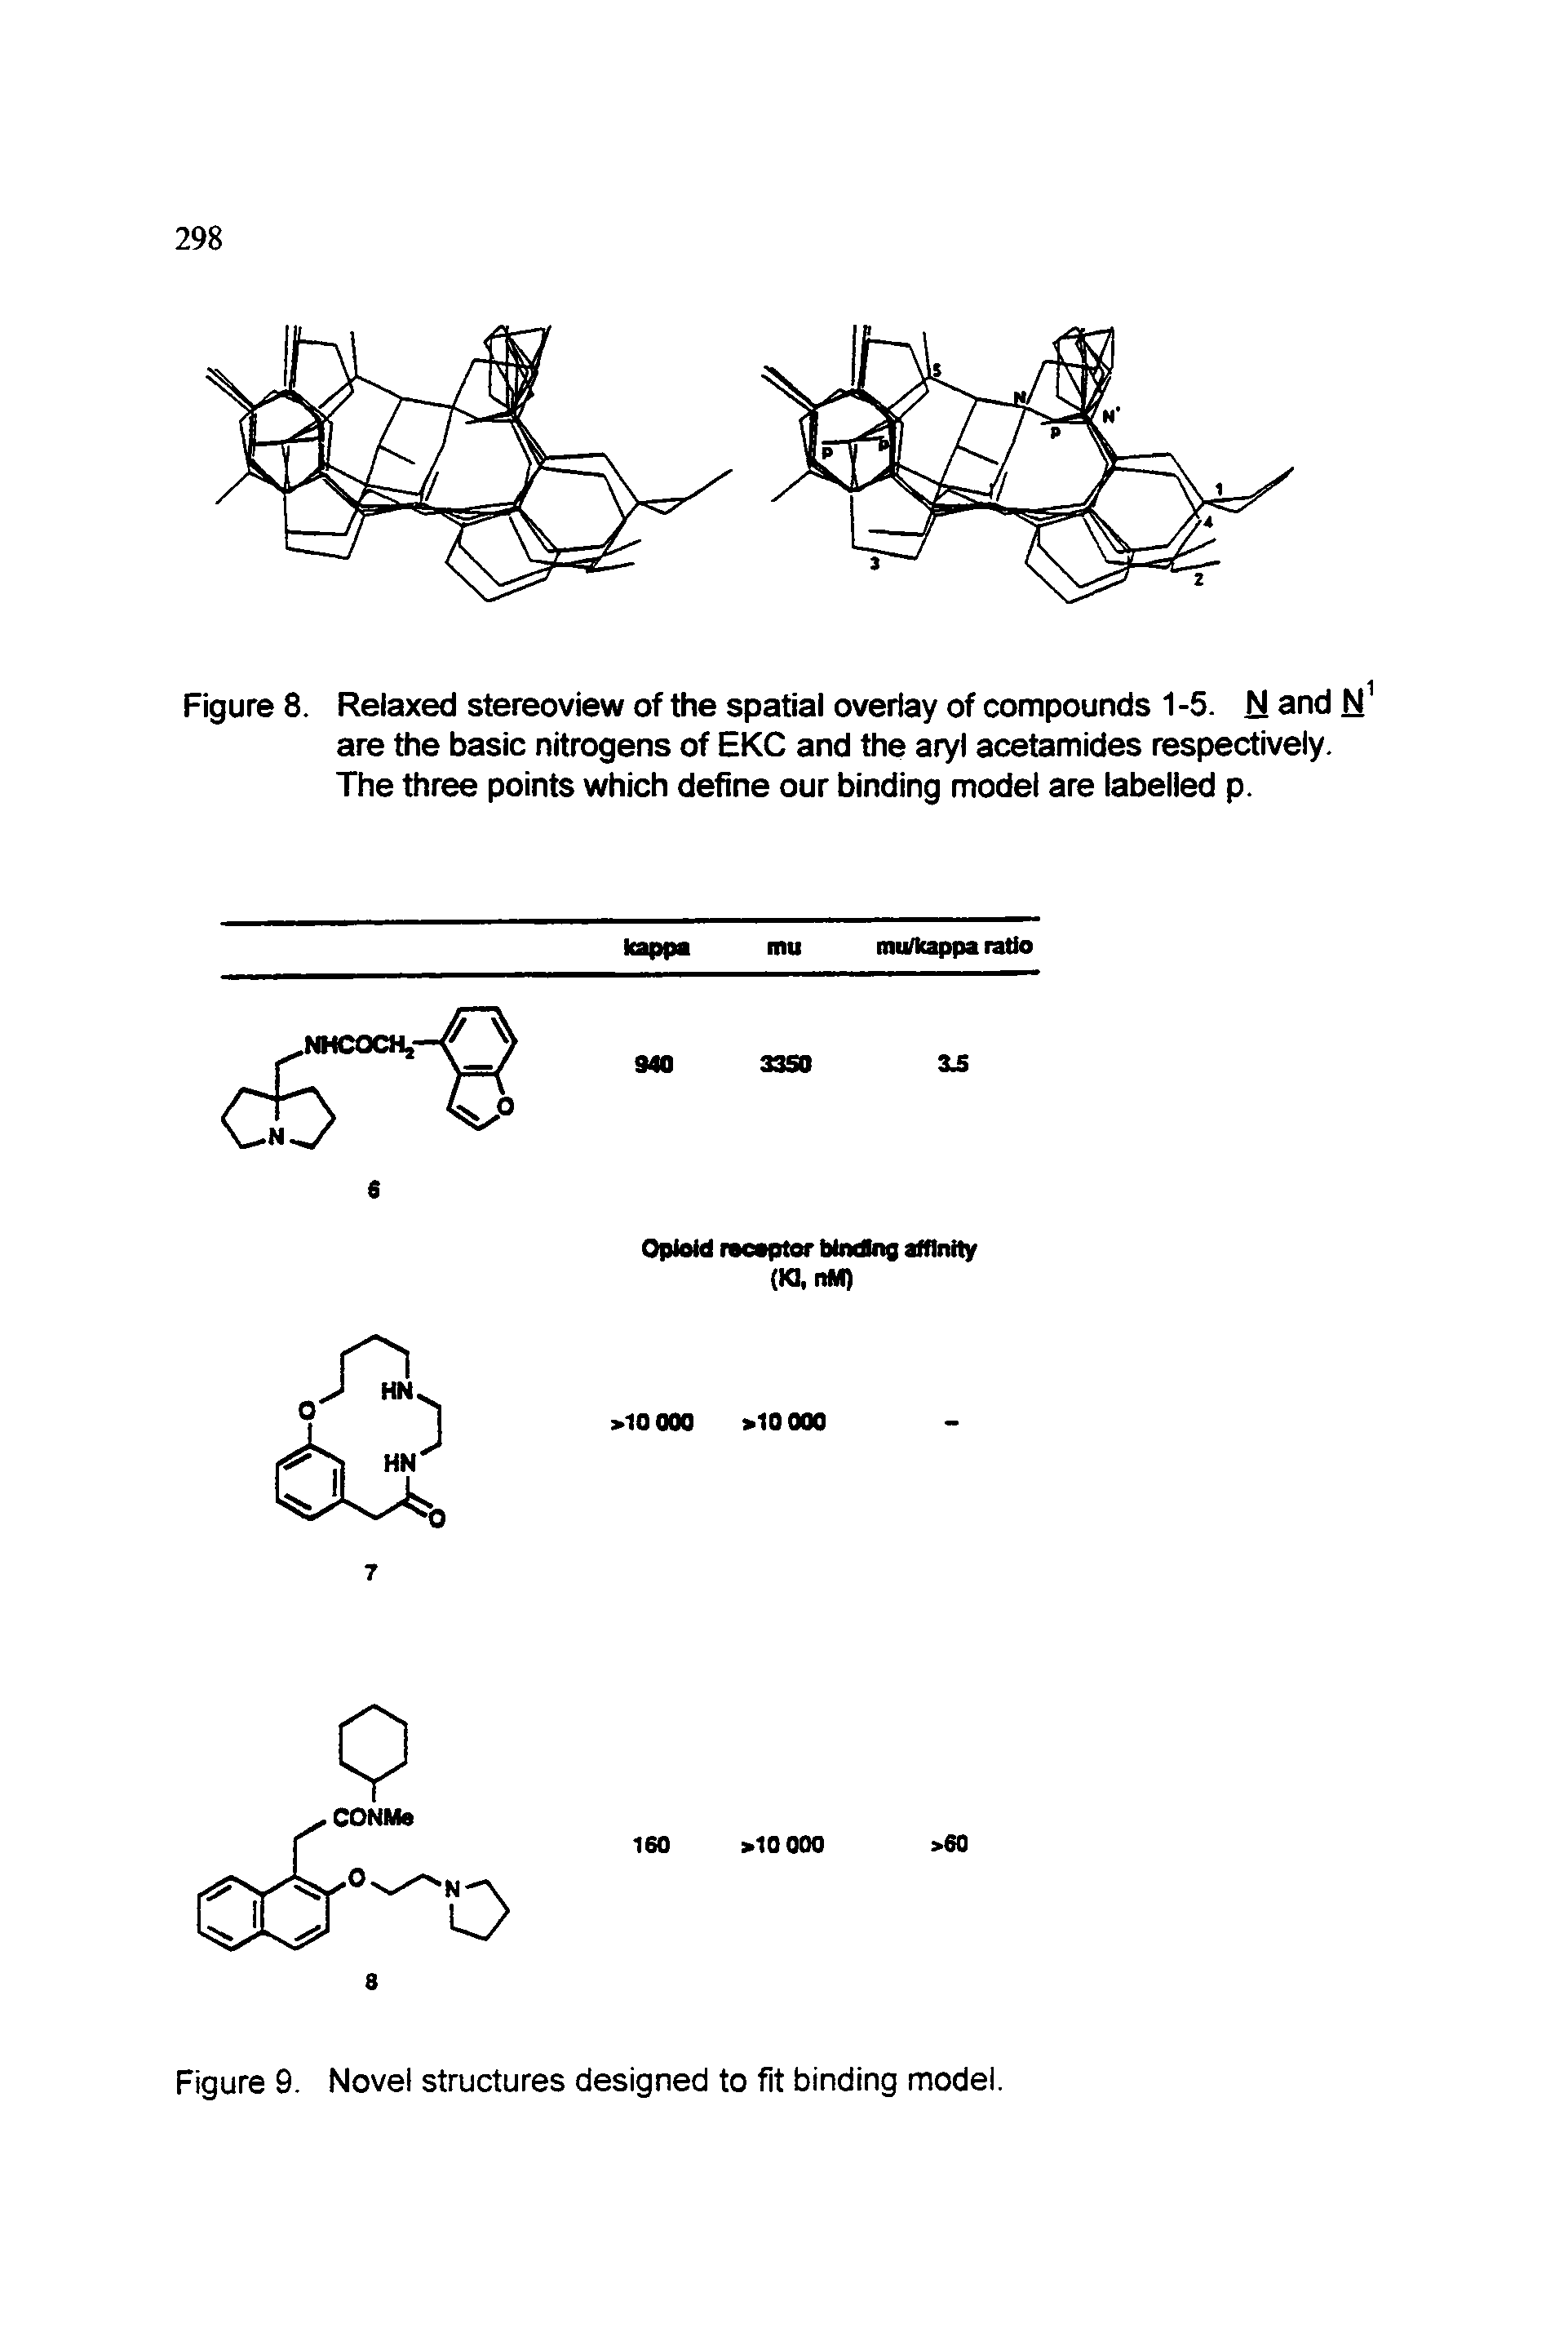 Figure 8. Relaxed stereoview of the spatial overlay of compounds 1-5. N and are the basic nitrogens of EKC and the aryl acetamides respectively. The three points which define our binding model are labelled p.